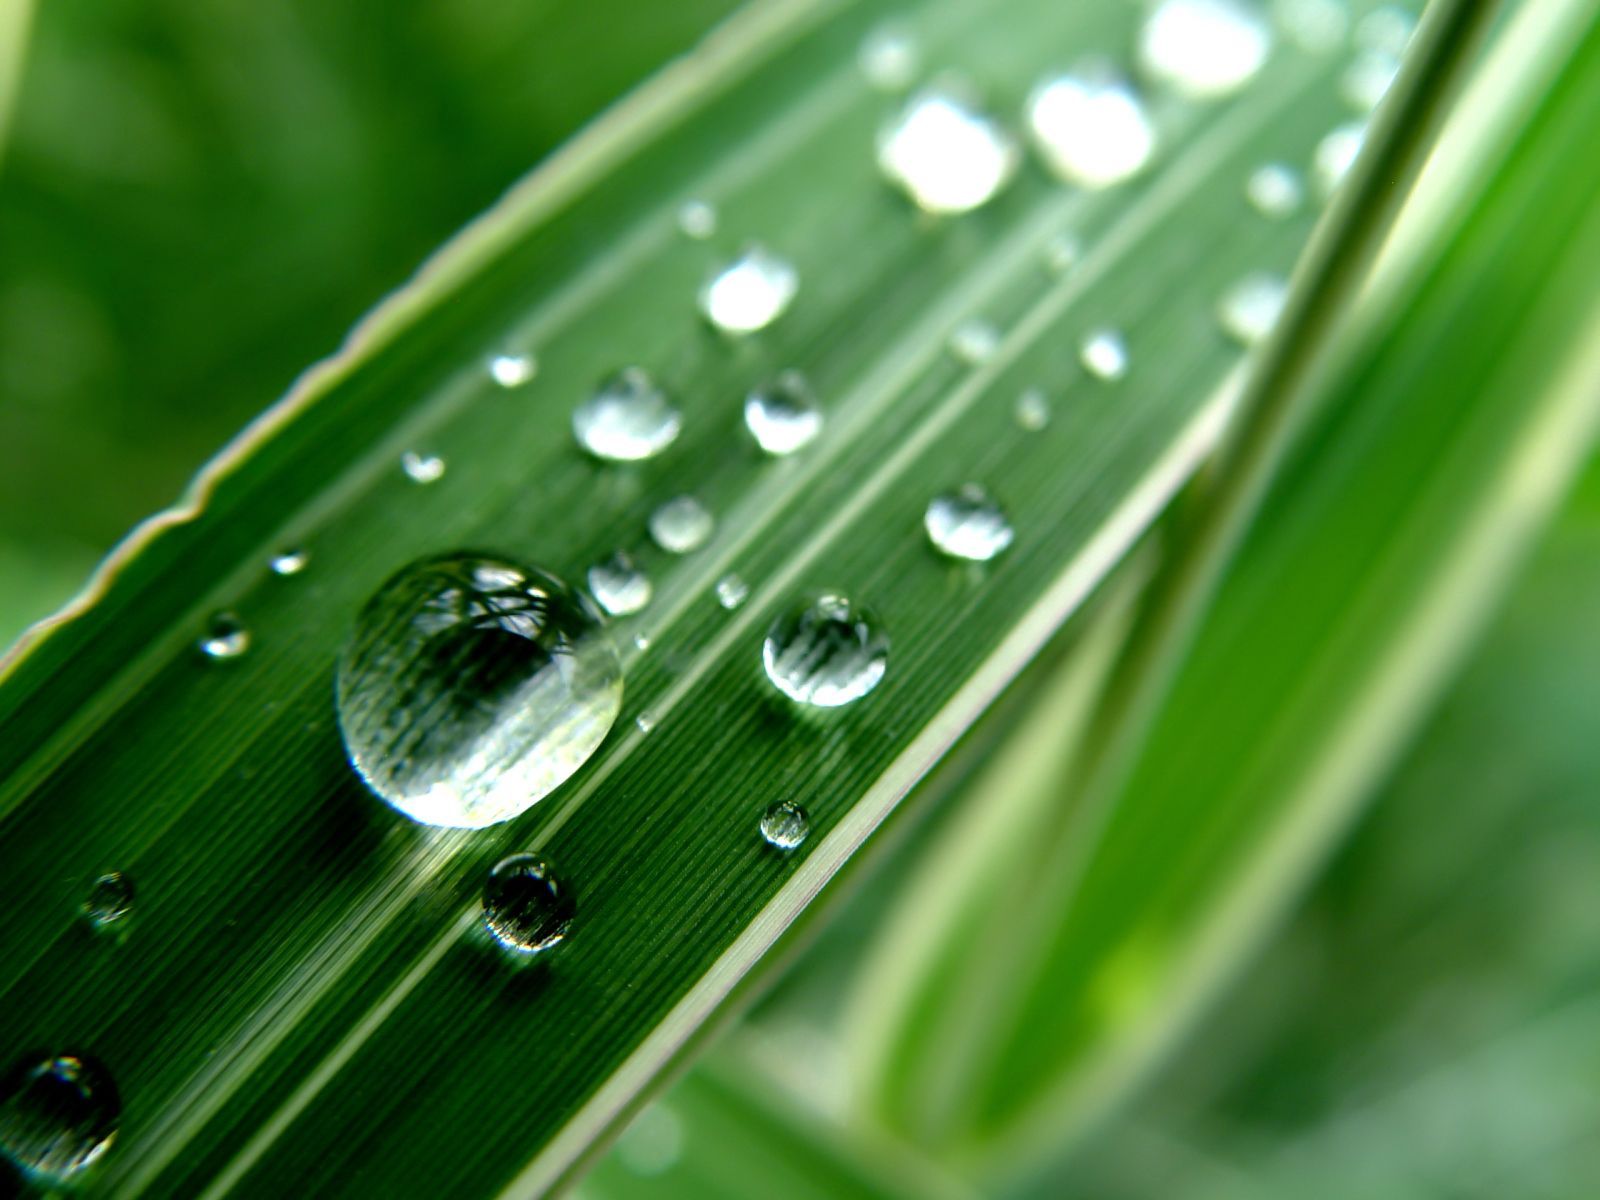 Water dripping. iPhone 5s wallpaper, Plant wallpaper, Water droplets